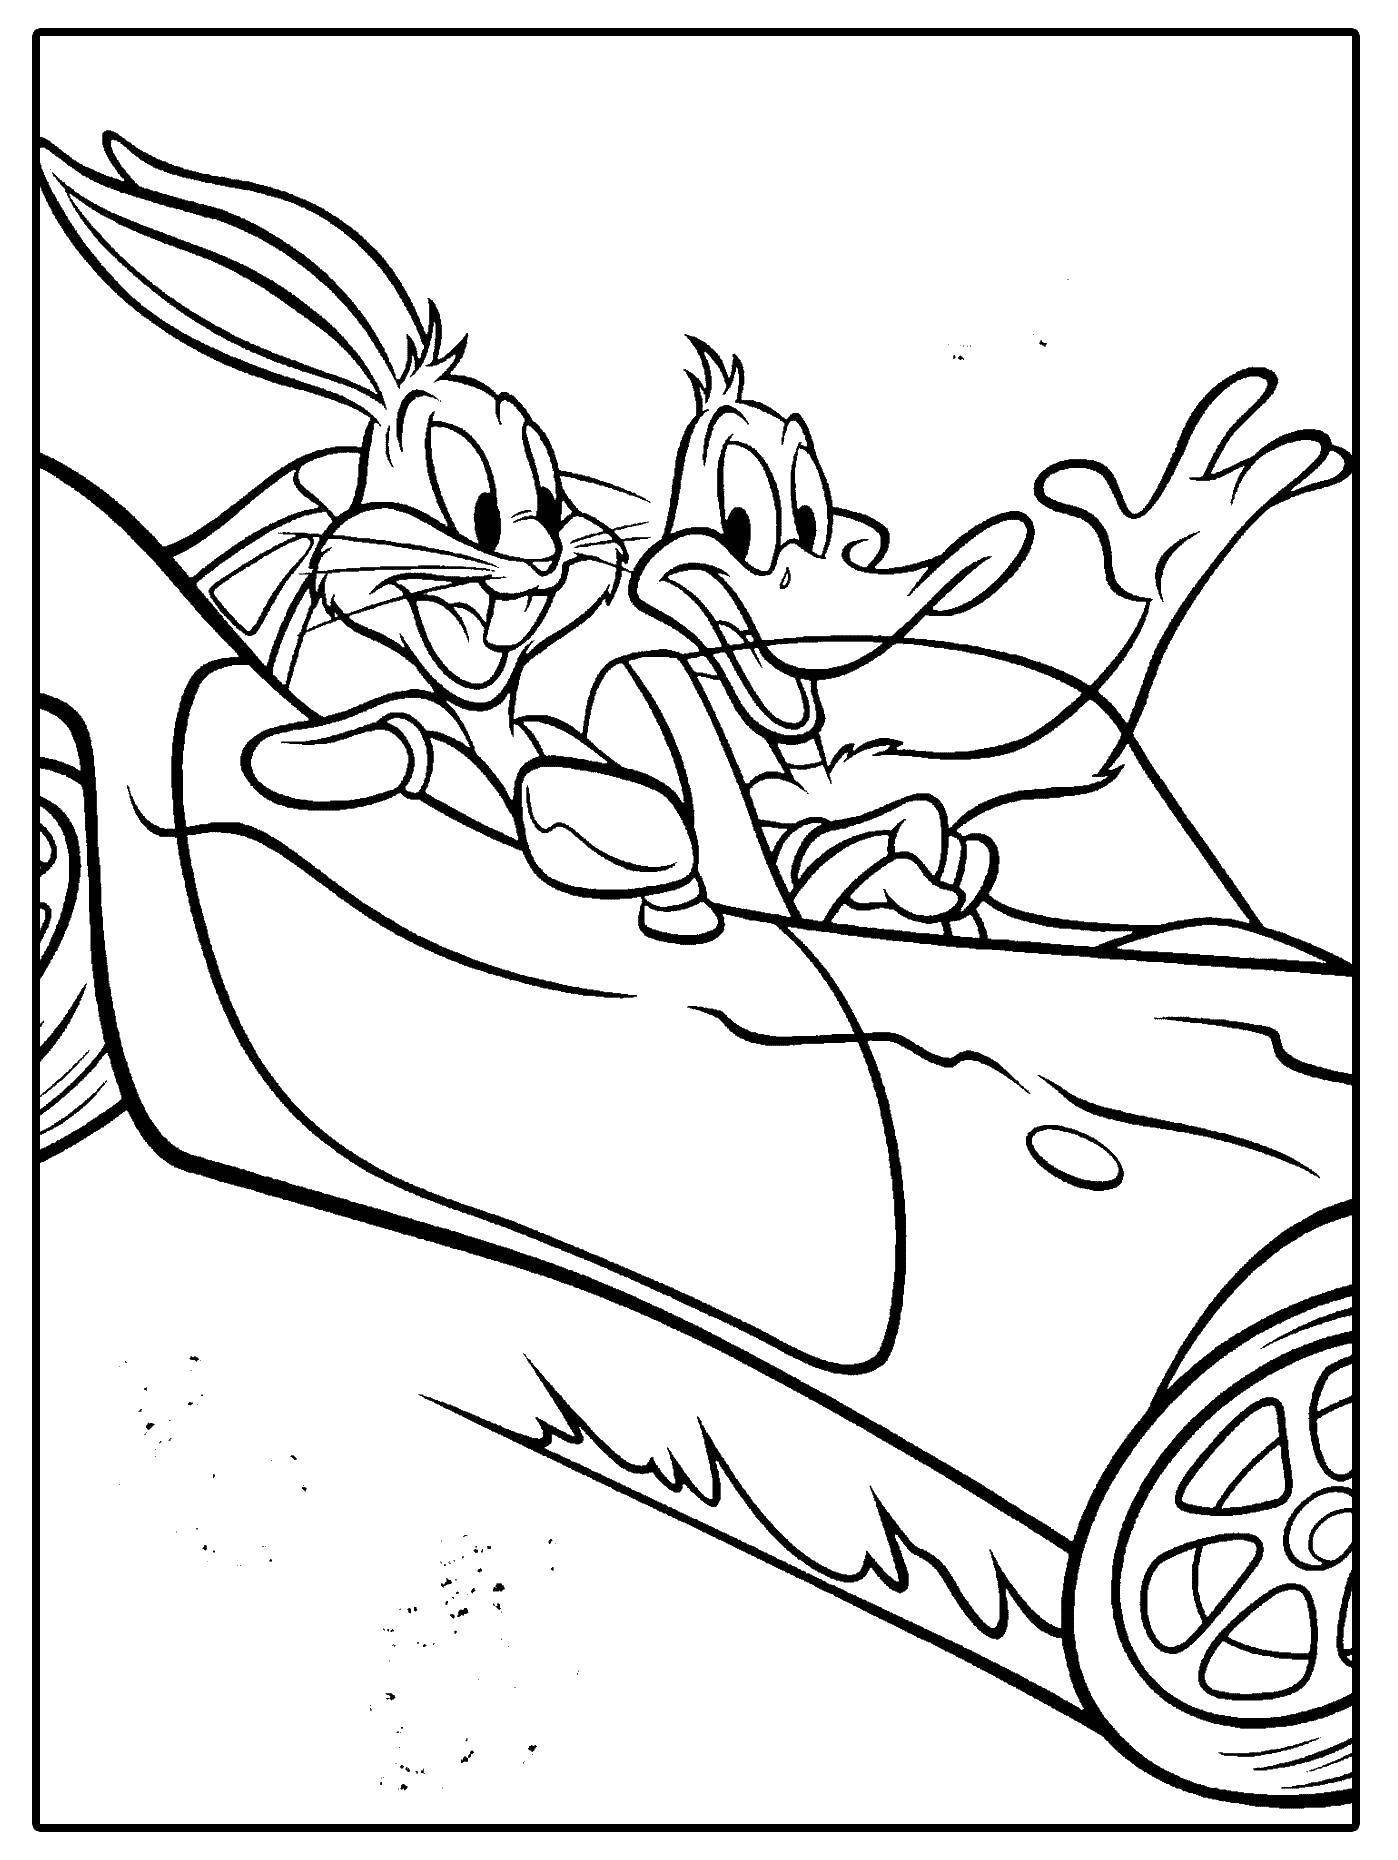 Coloring Bugs Bunny and daffy duck ride car. Category cartoons. Tags:  bugs Bunny, daffy duck.